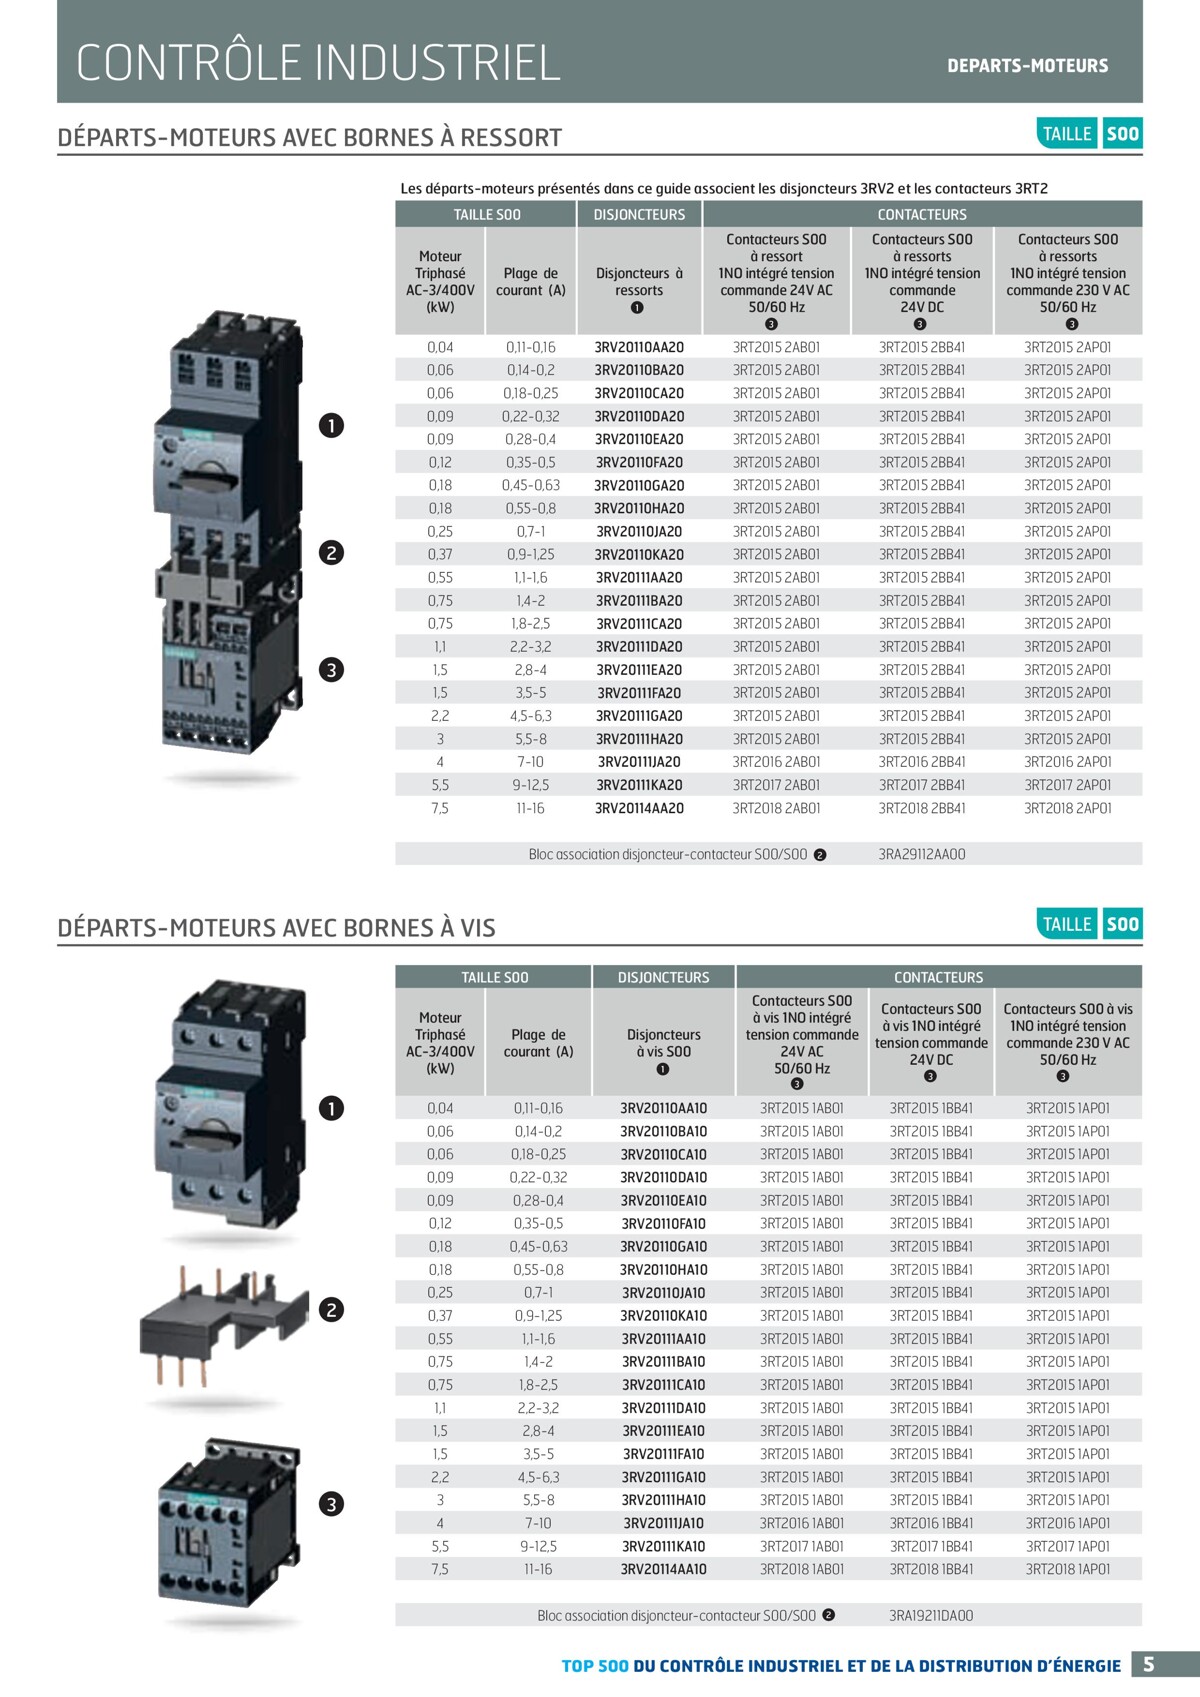 Catalogue TOP 500 siemens - Rexel, page 00005